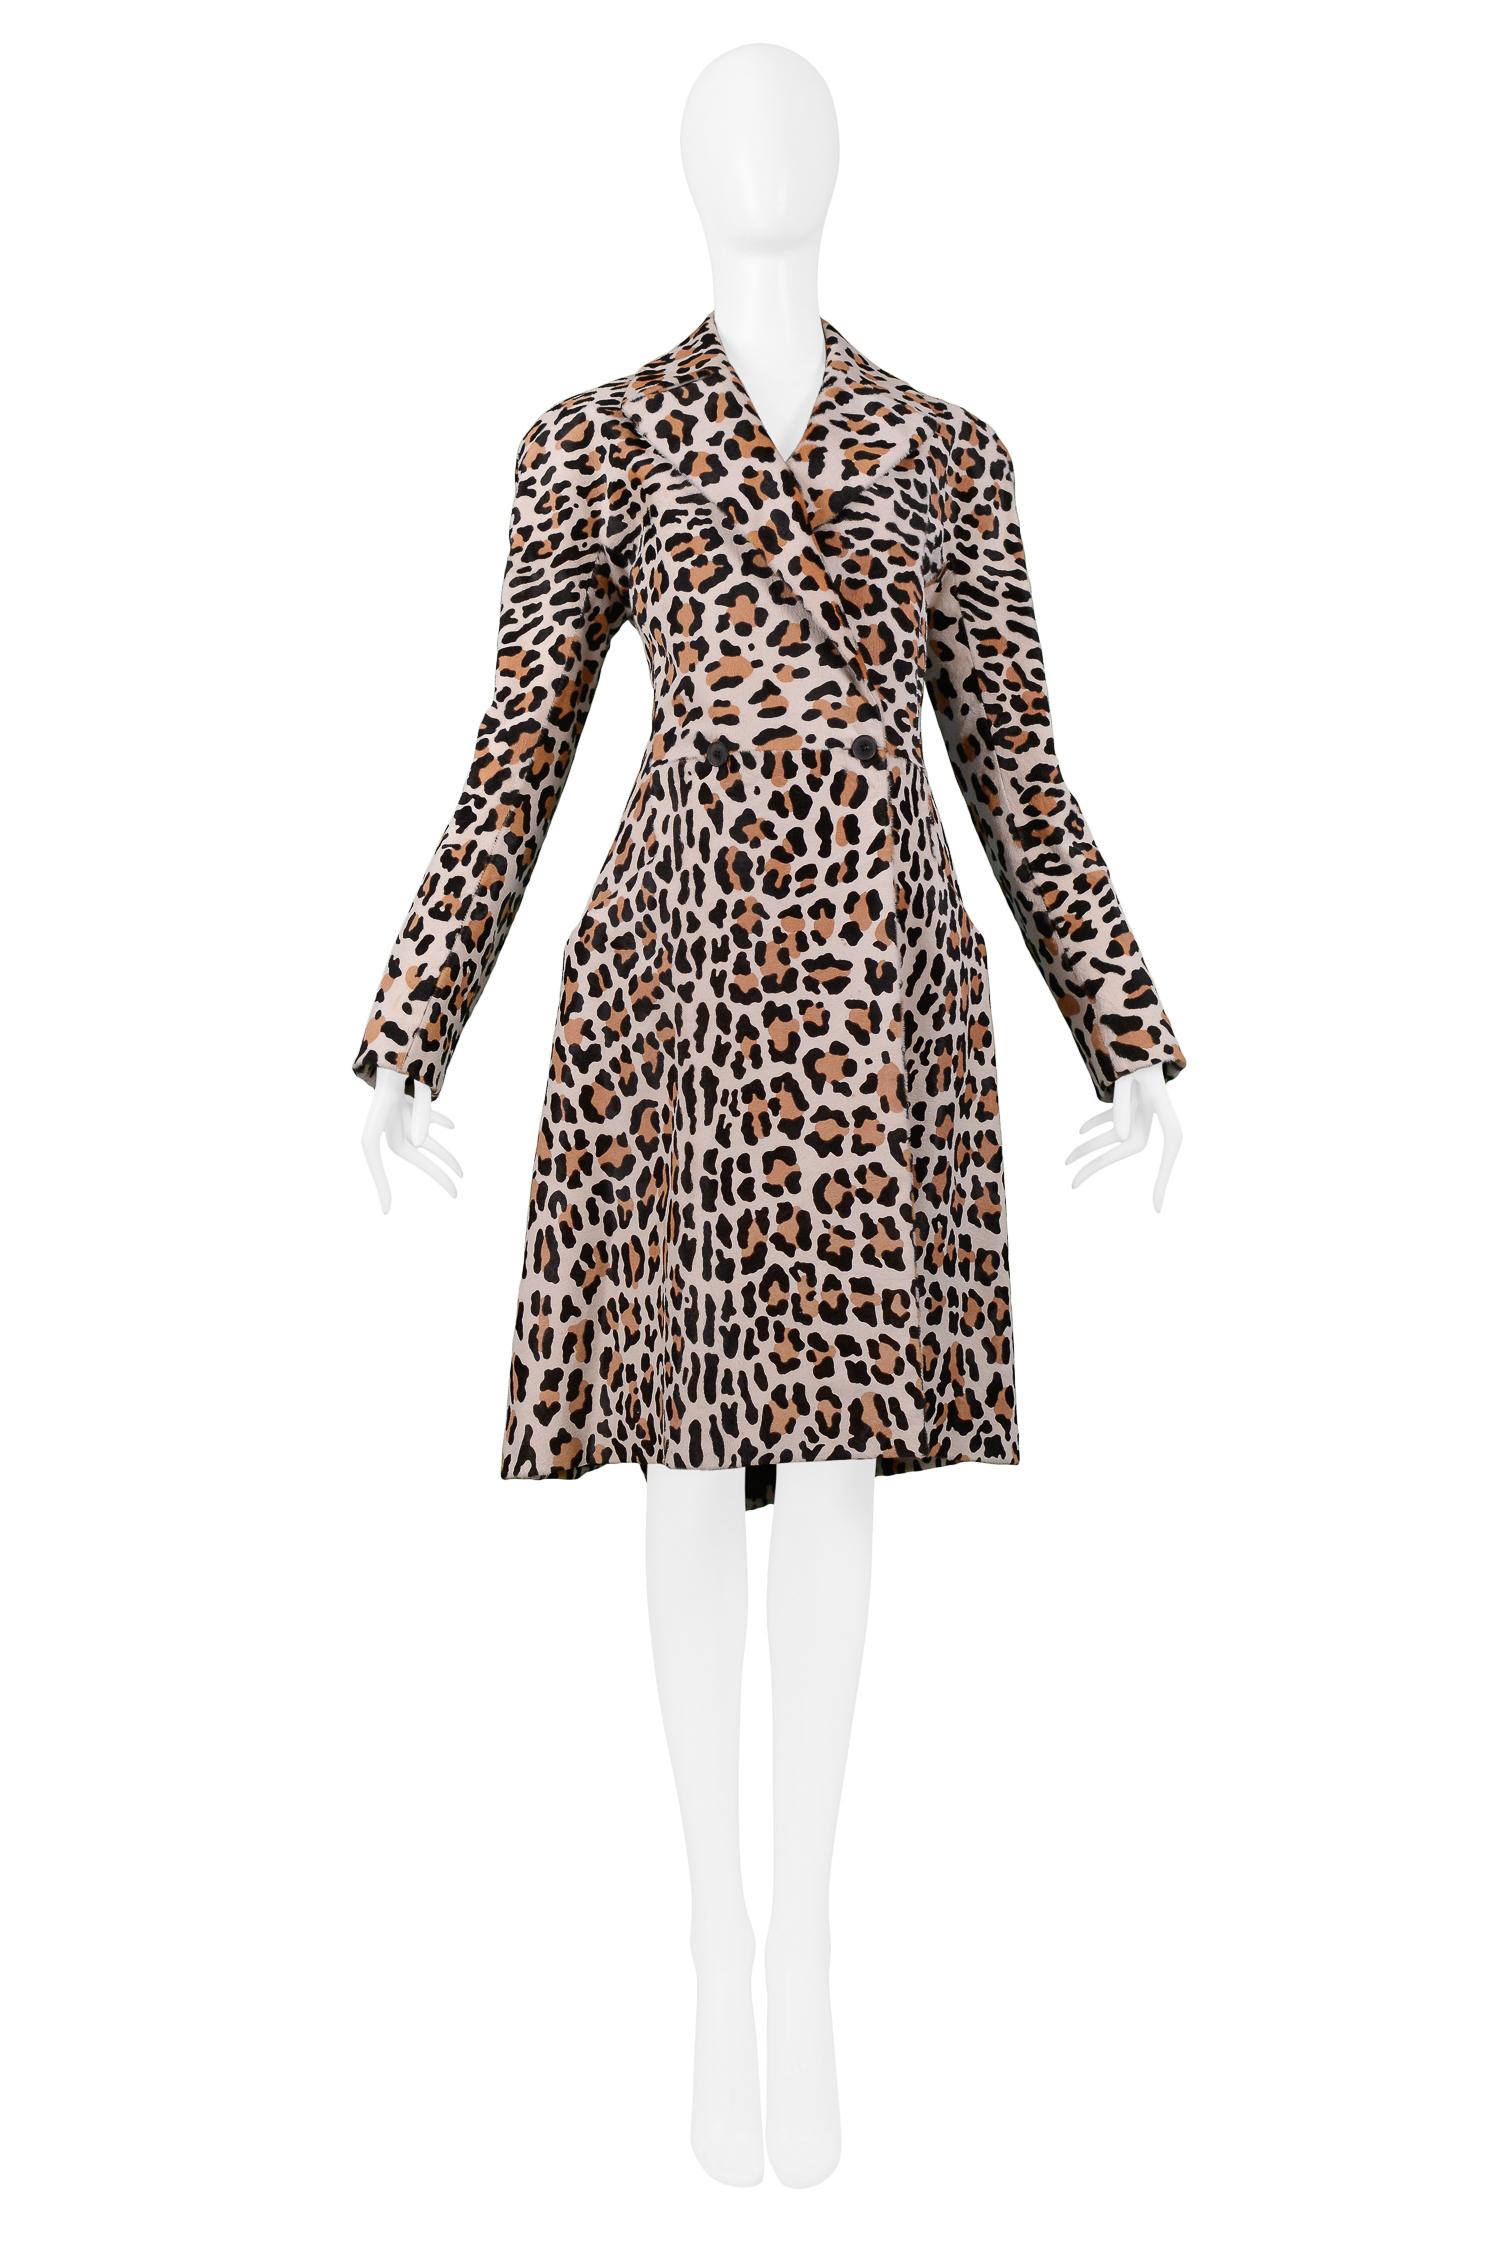 A stunning vintage pony hair Azzedine Alaia leopard print coat with black double button closure, a vented back, side pockets, and fully lined. 

Excellent original condition with no 